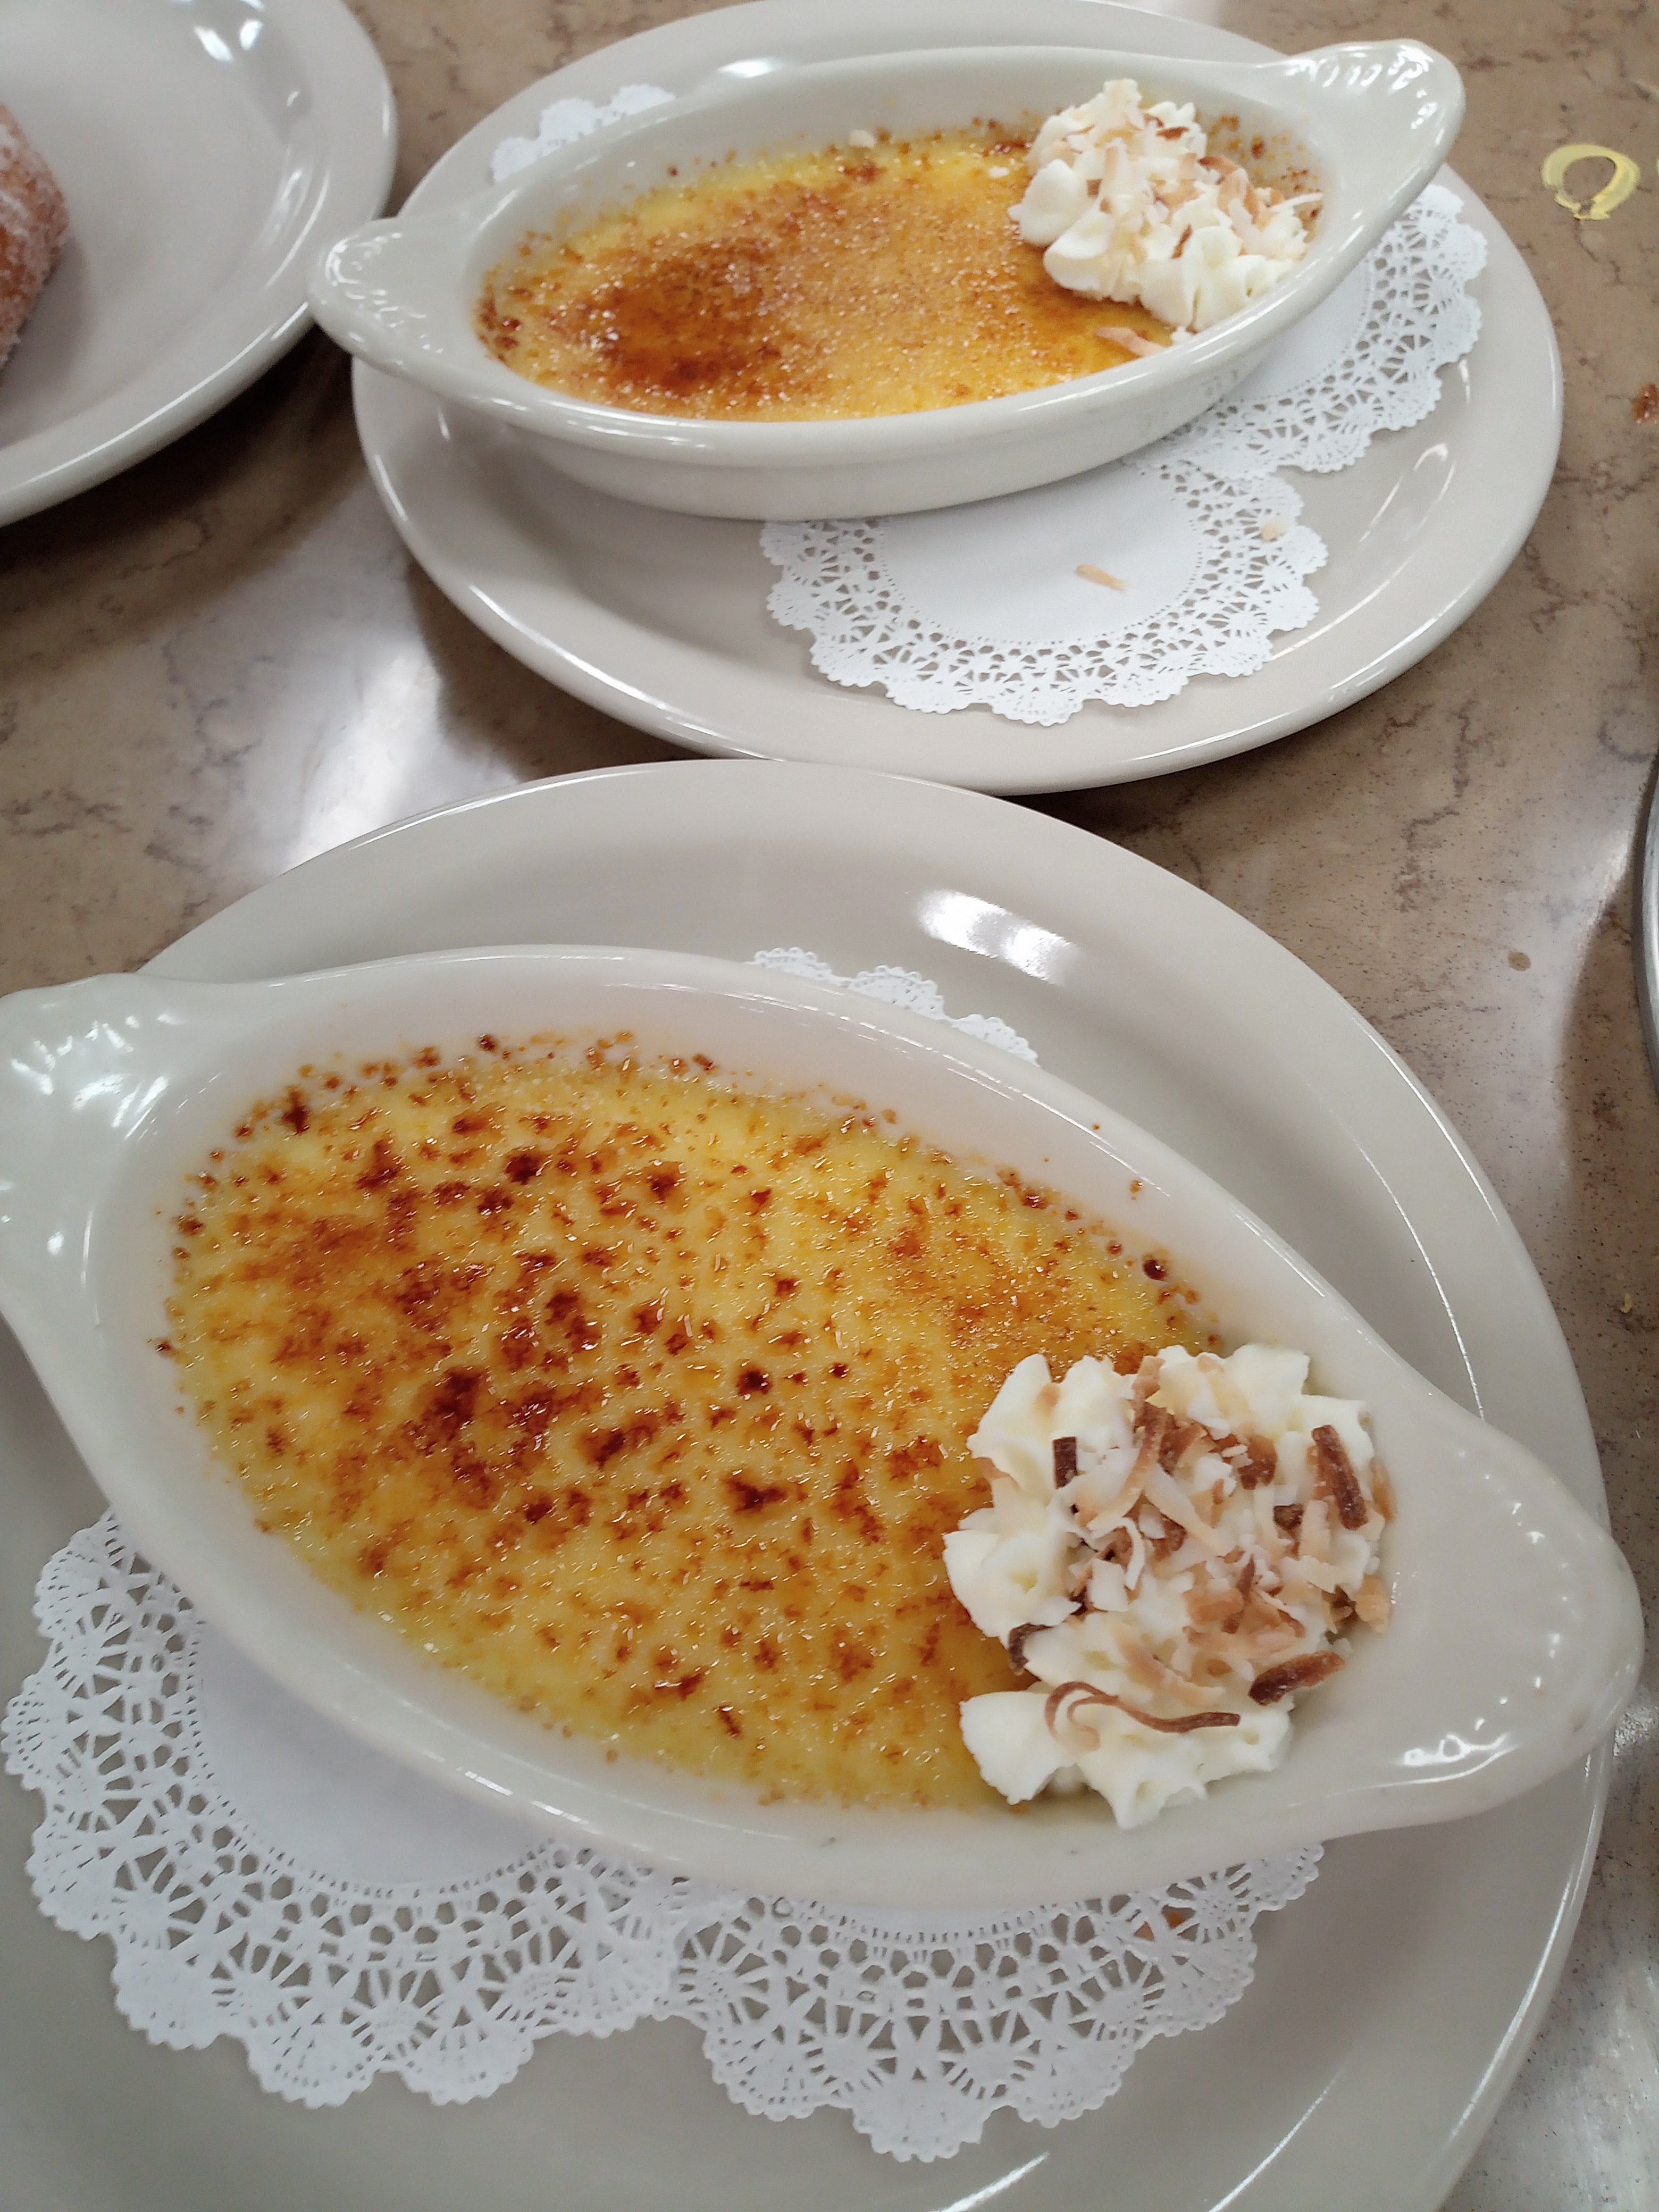 two creme brulees garnished with whipped cream and toasted coconut in oval ramekins on doily covered plates